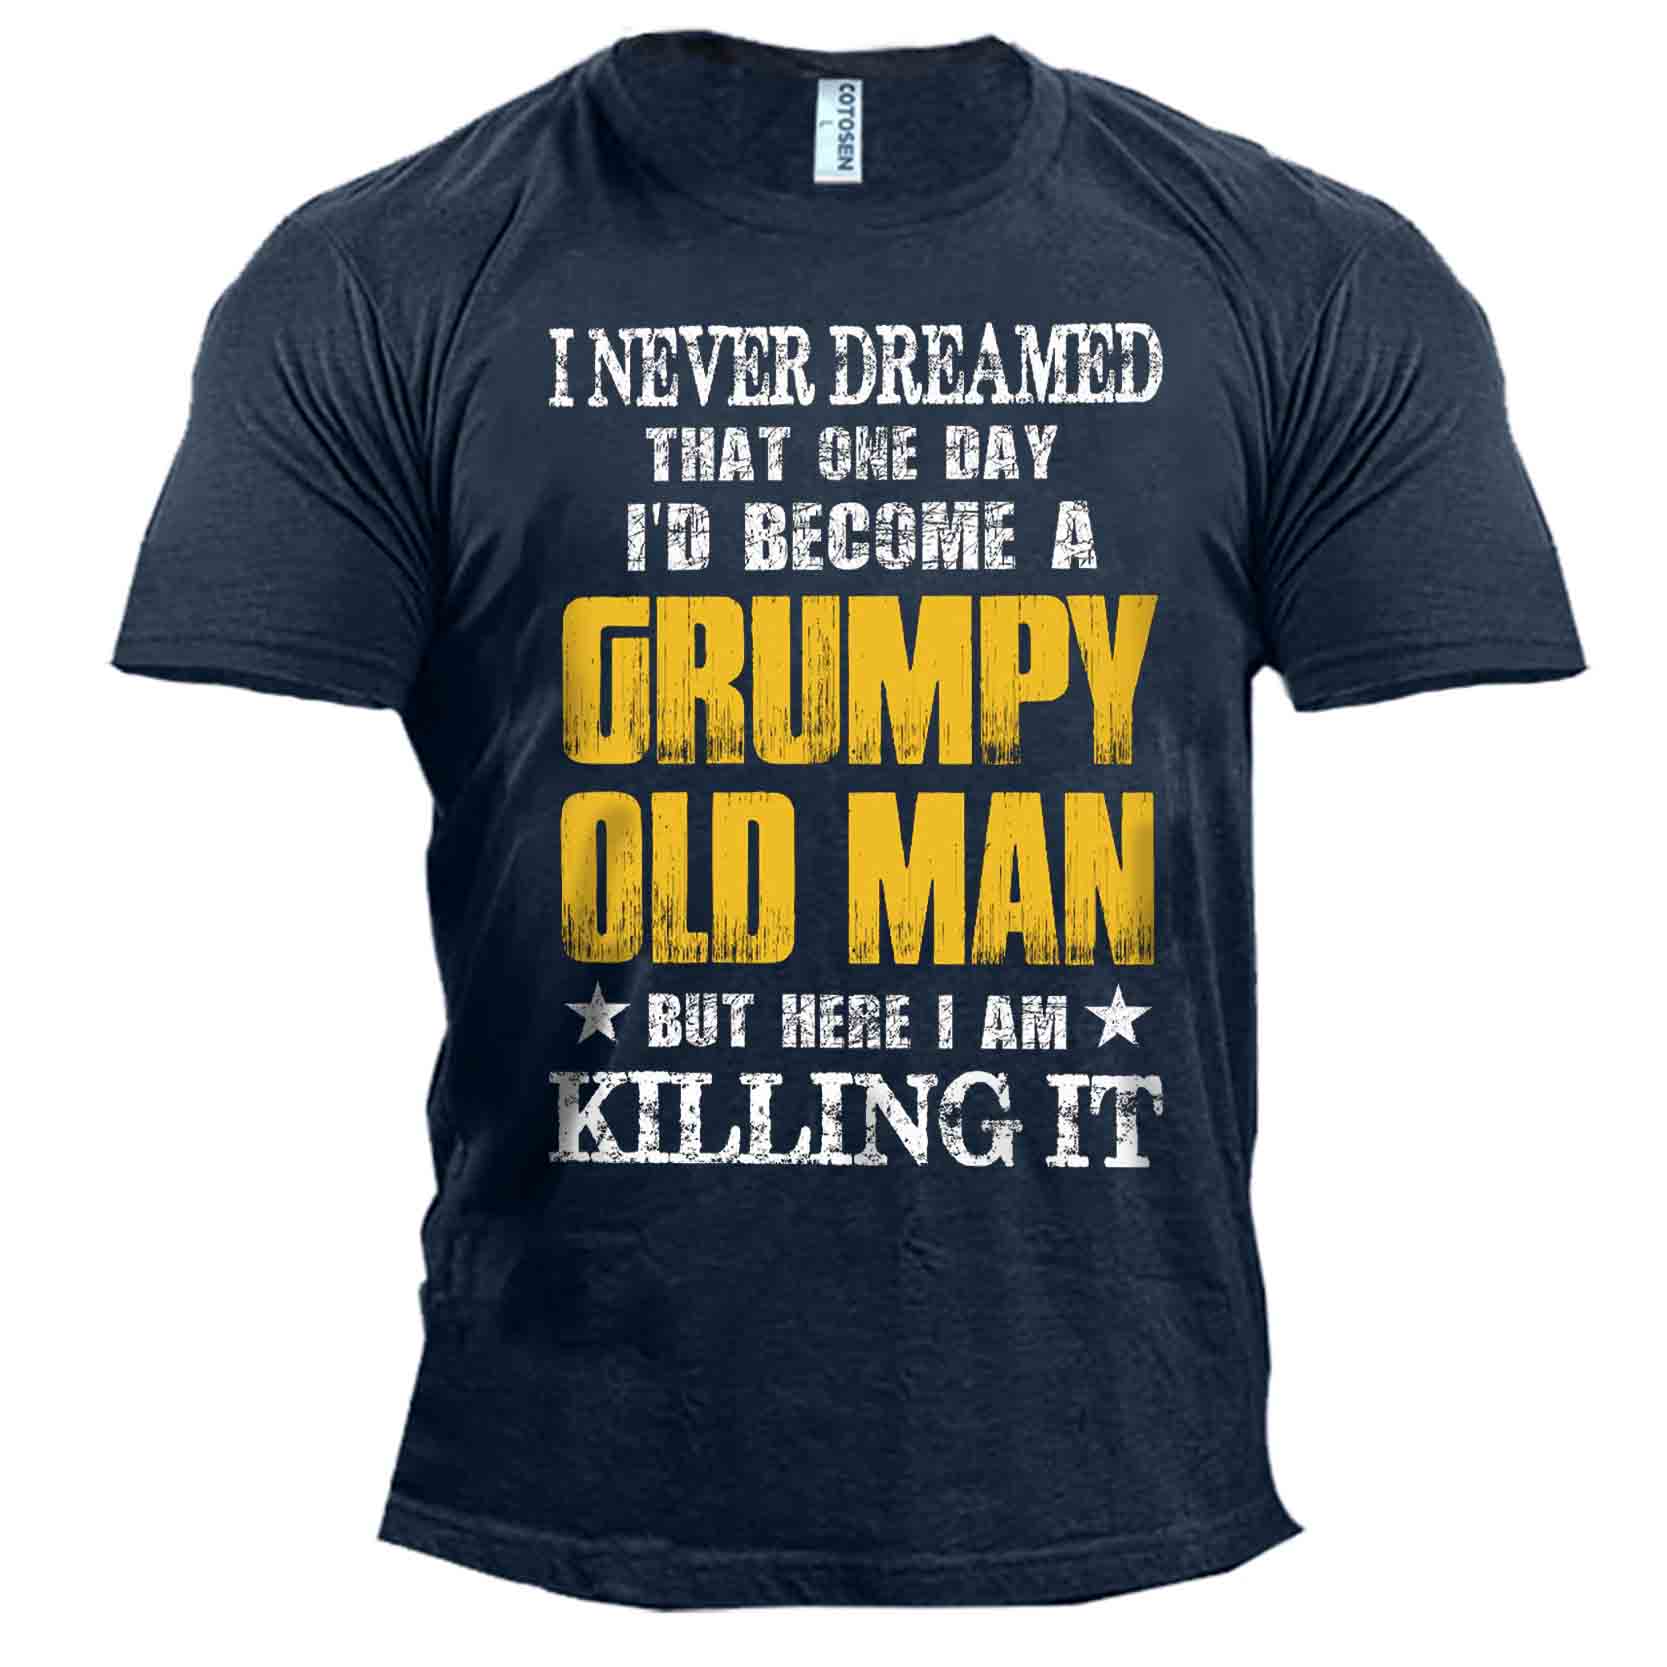 Men's Never Dreamed A Chic Grumpy Old Man Cotton T-shirt